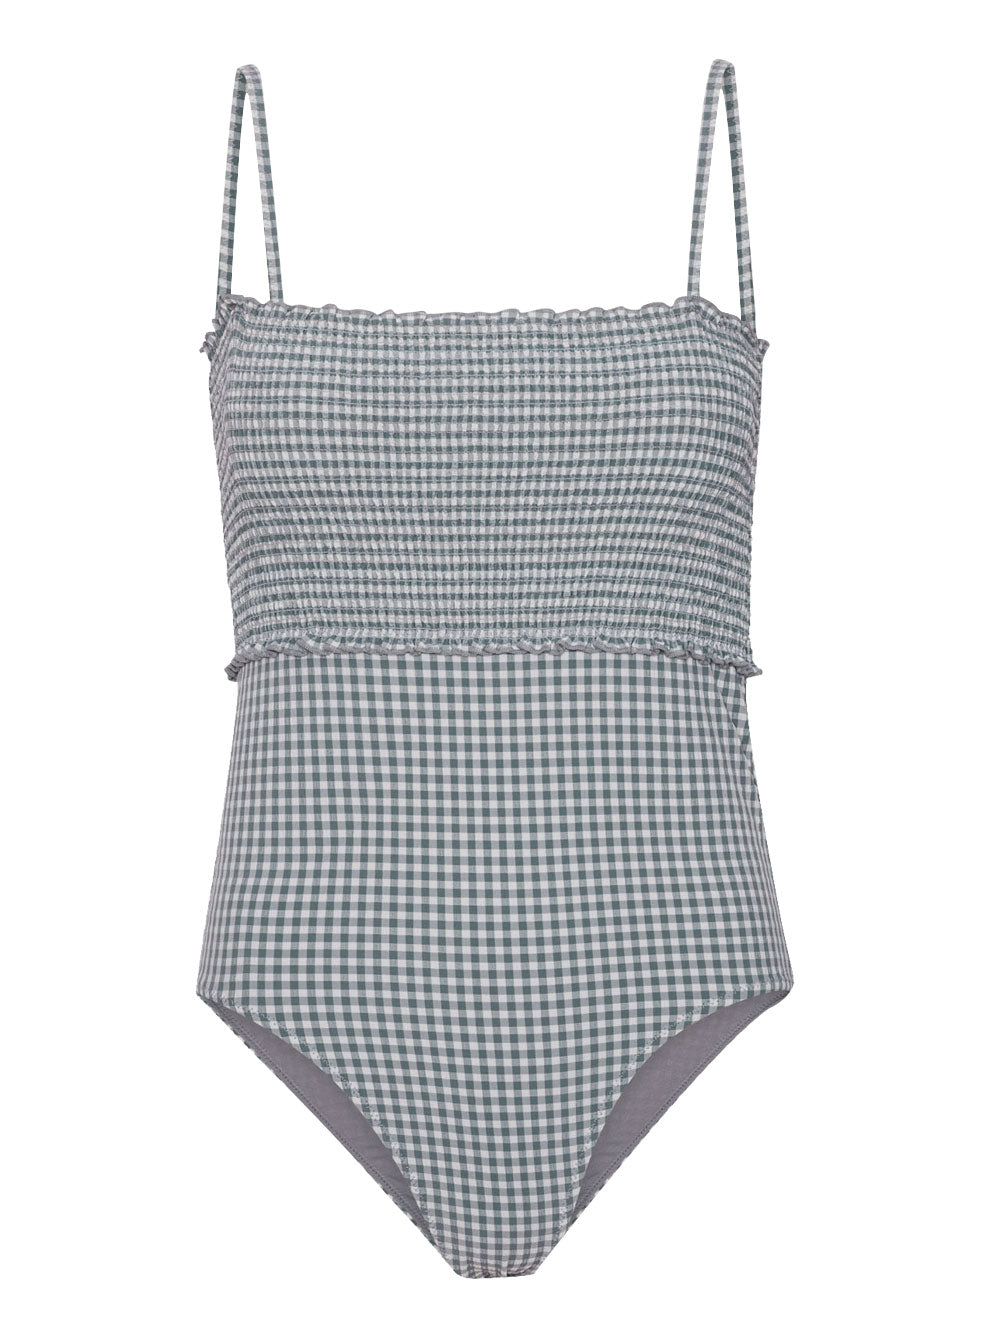 Helios Swimsuit - Shan and Toad - Luxury Kidswear Shop